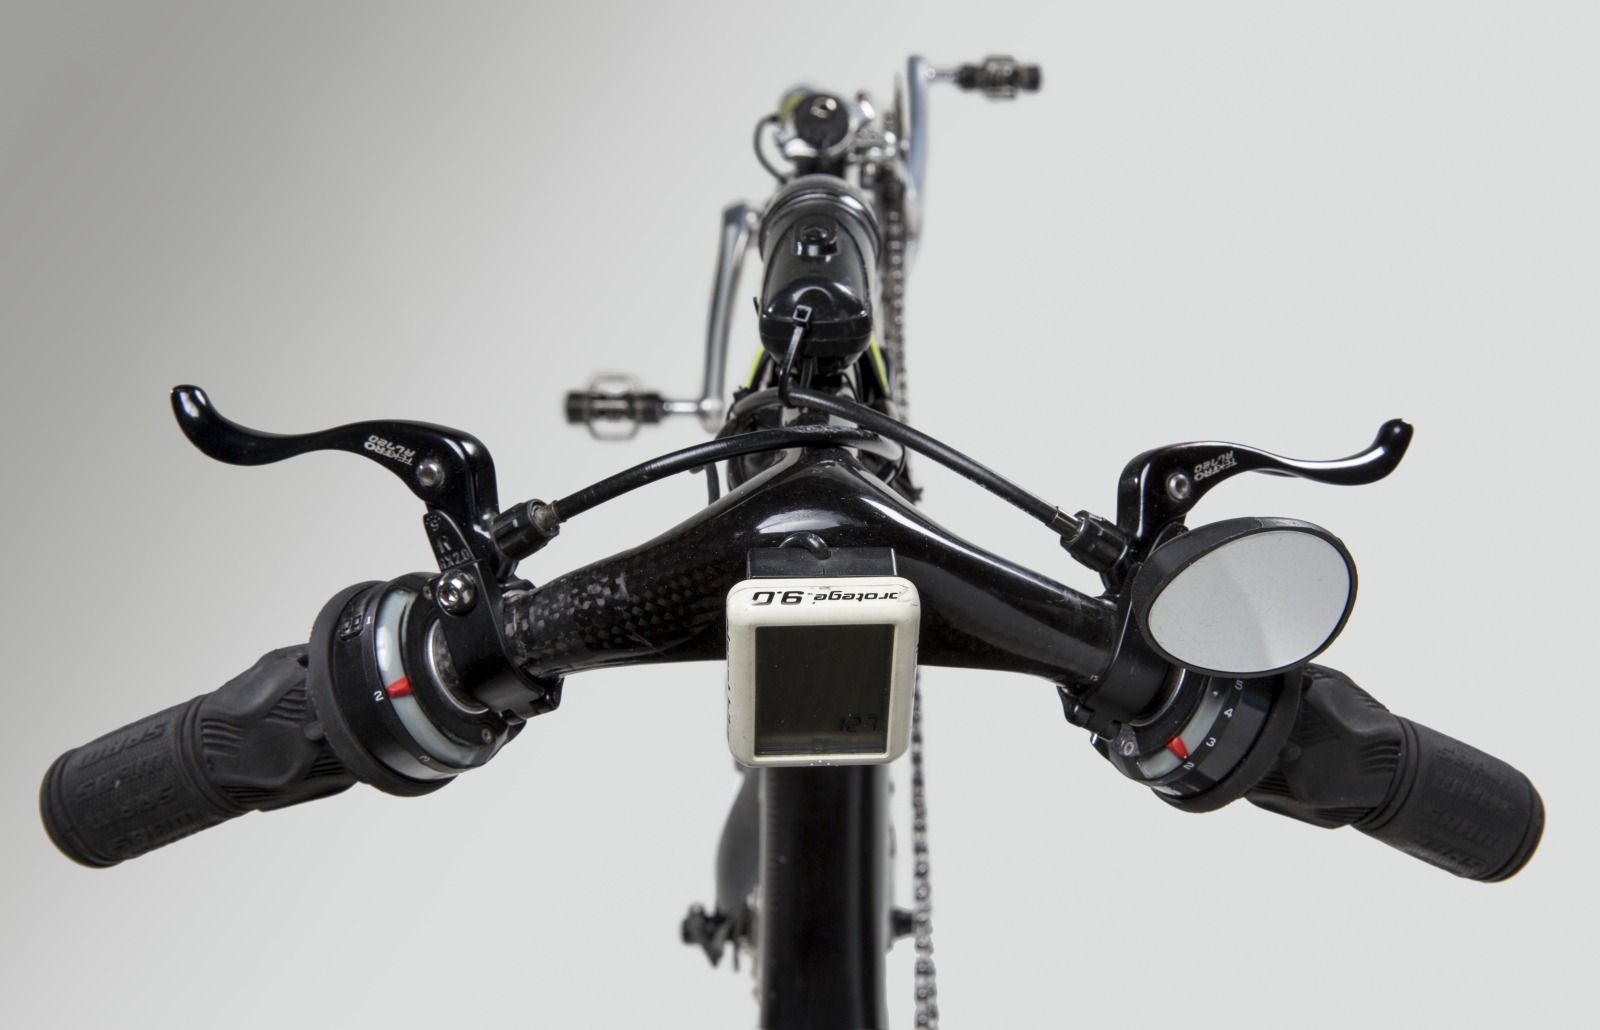 Colour photo, taken from above, showing a close up view of a bike's handlebars, with rubber handgrips and rear vision mirror. - click to view larger image